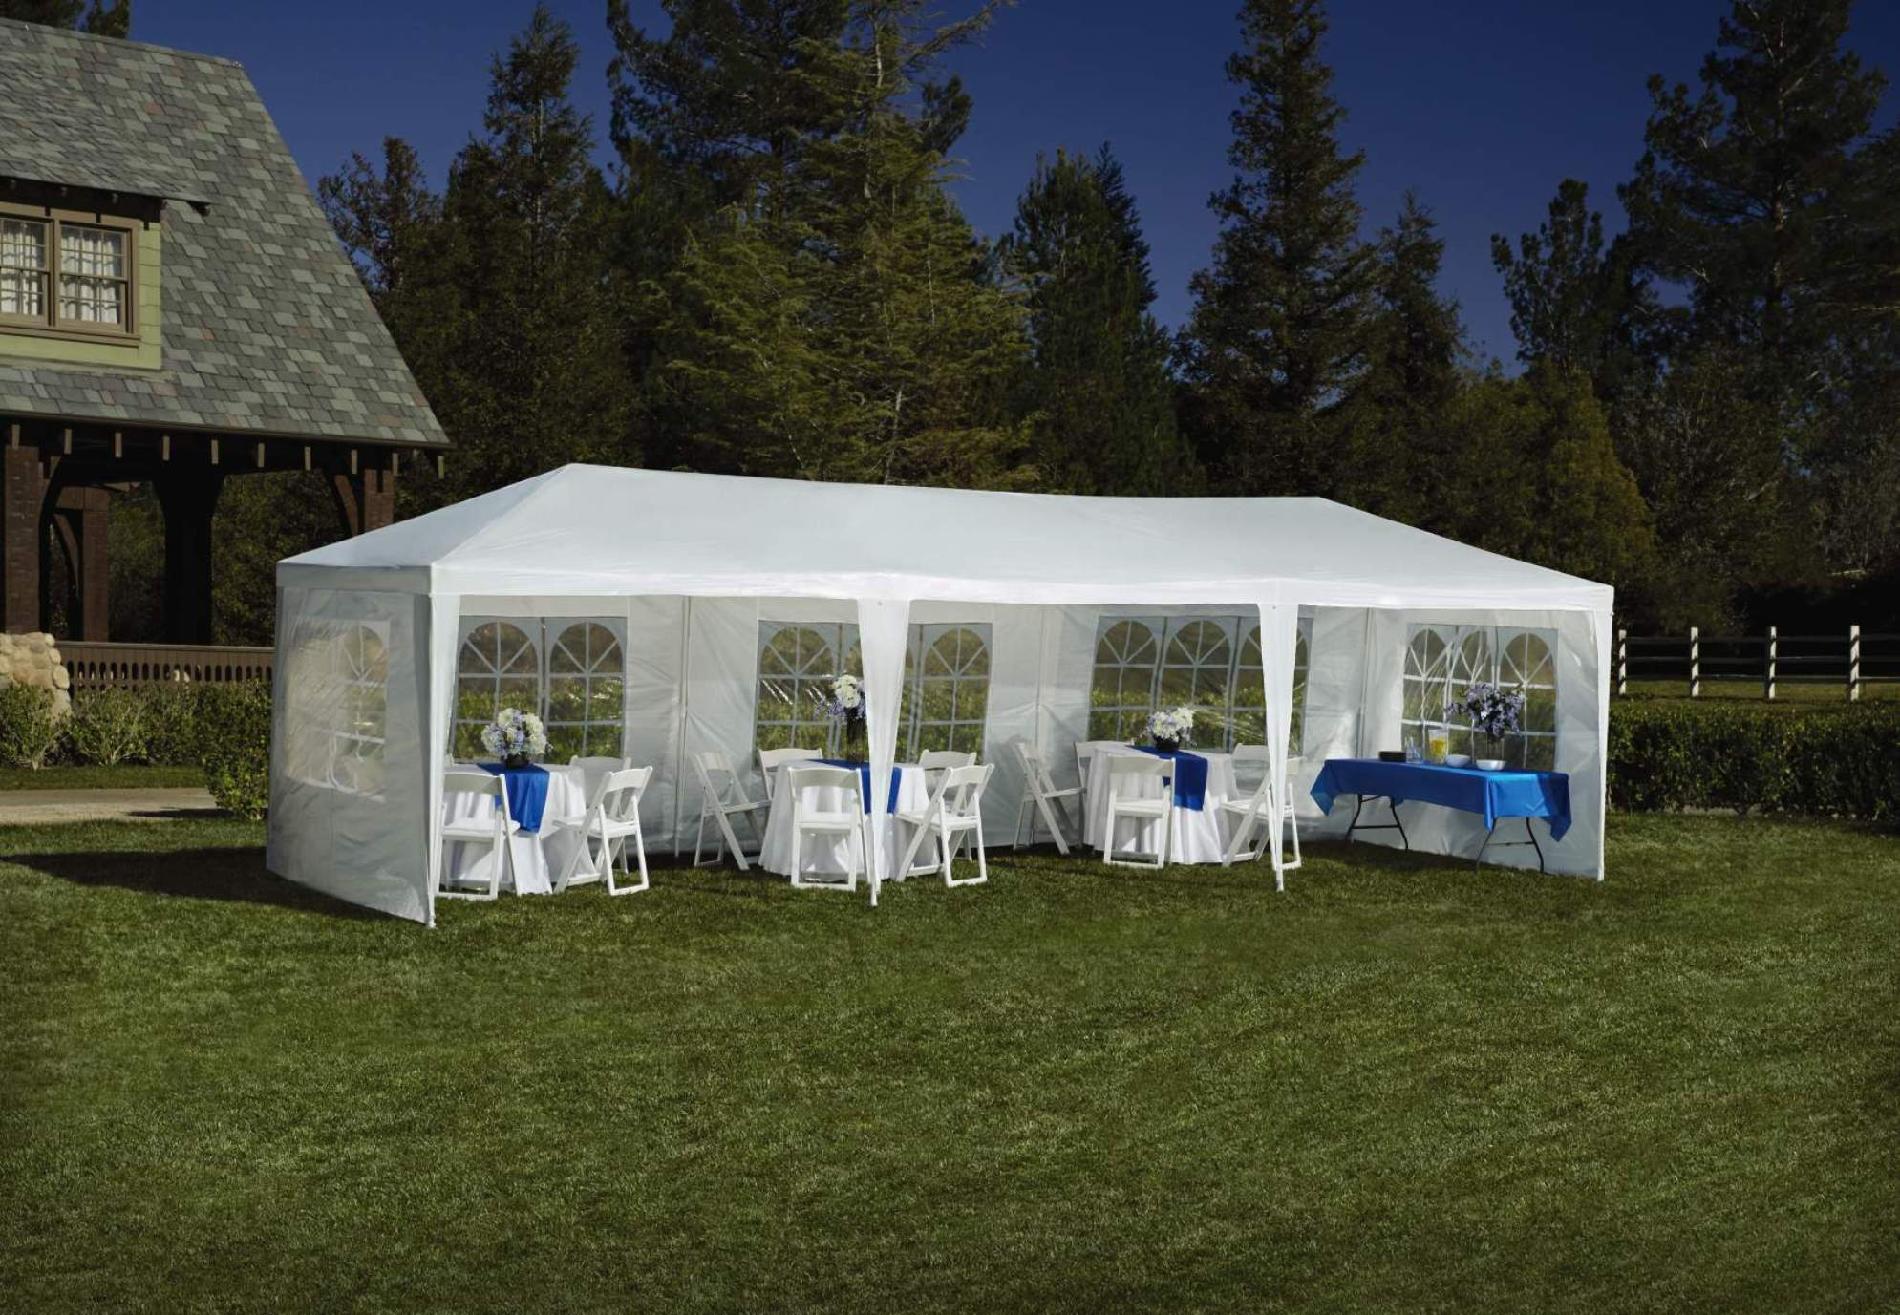 Sportcraft 9' x 27' Event Party Tent | Shop Your Way: Online Shopping ...